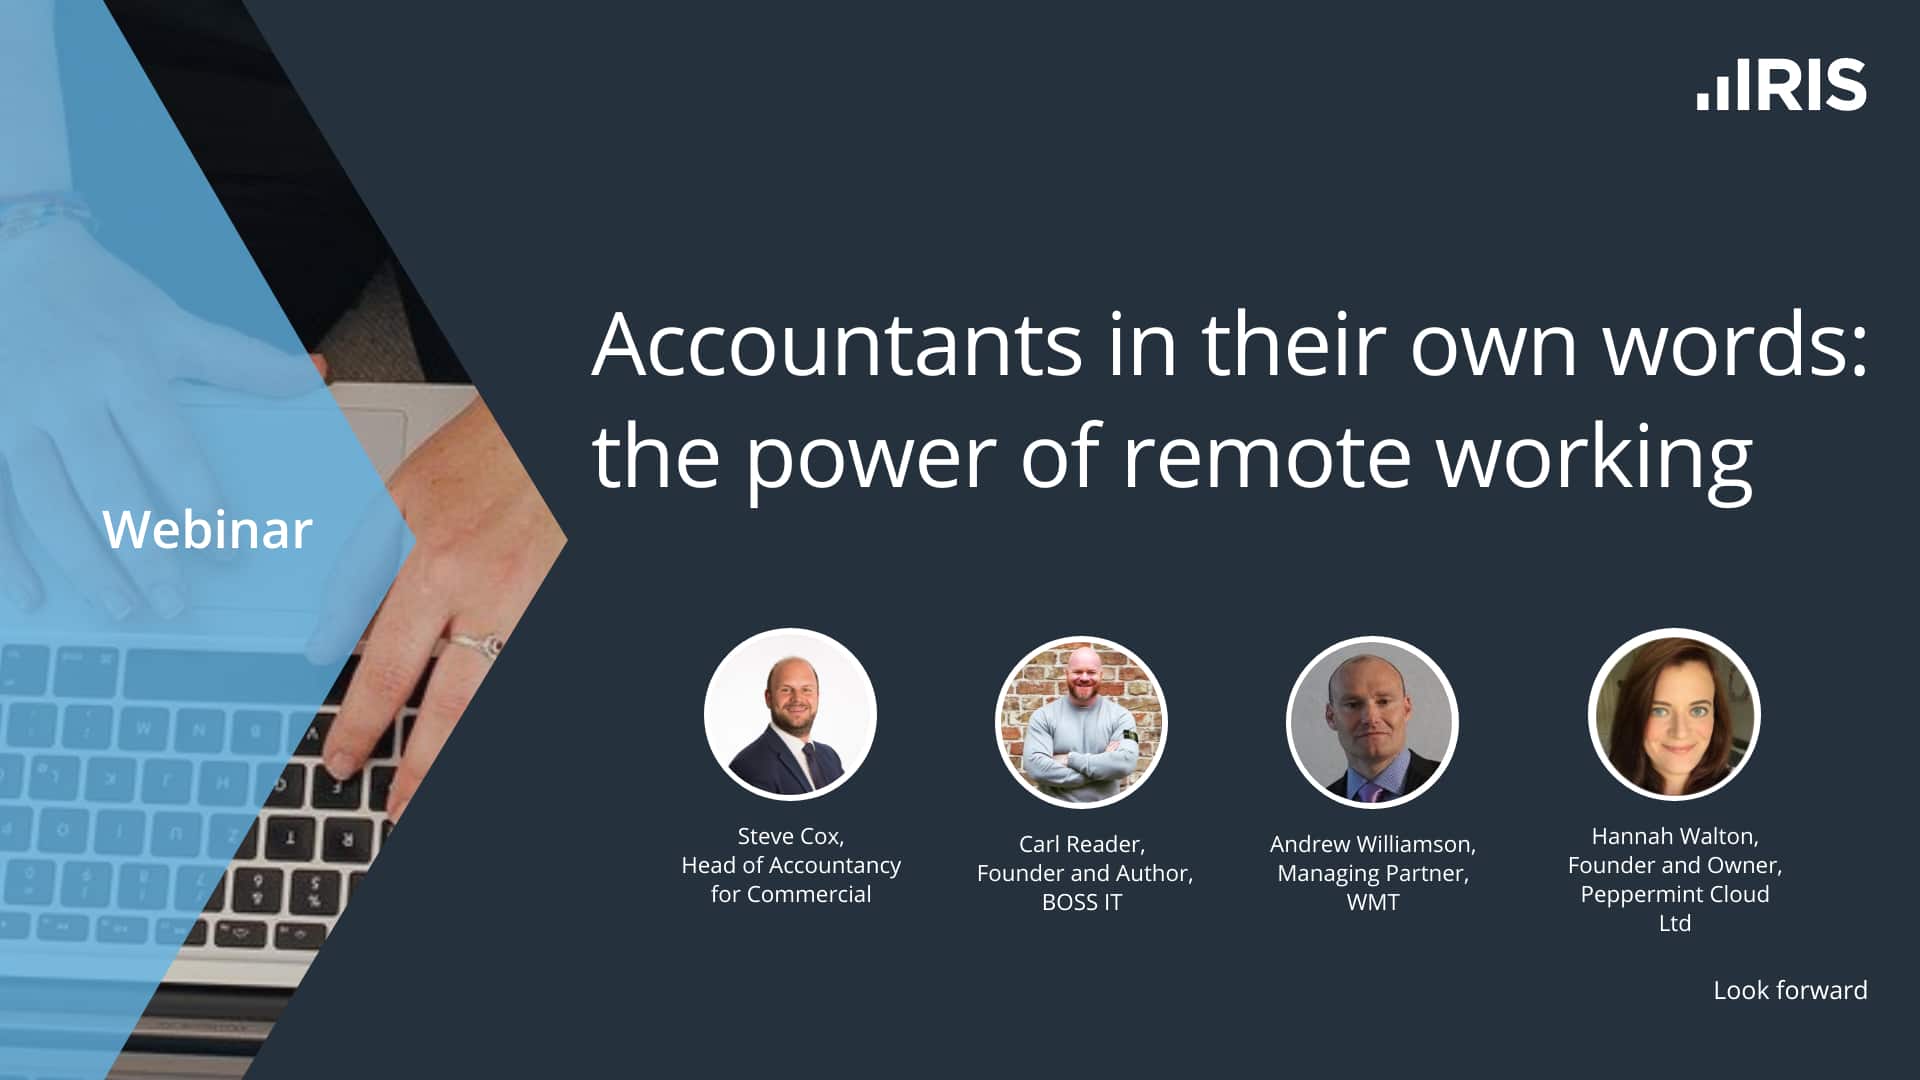 Accountants in their own words the power of remote working Holding Screen 15.07.21 Max Quality 1 | Accountants in their own words: the power of remote working